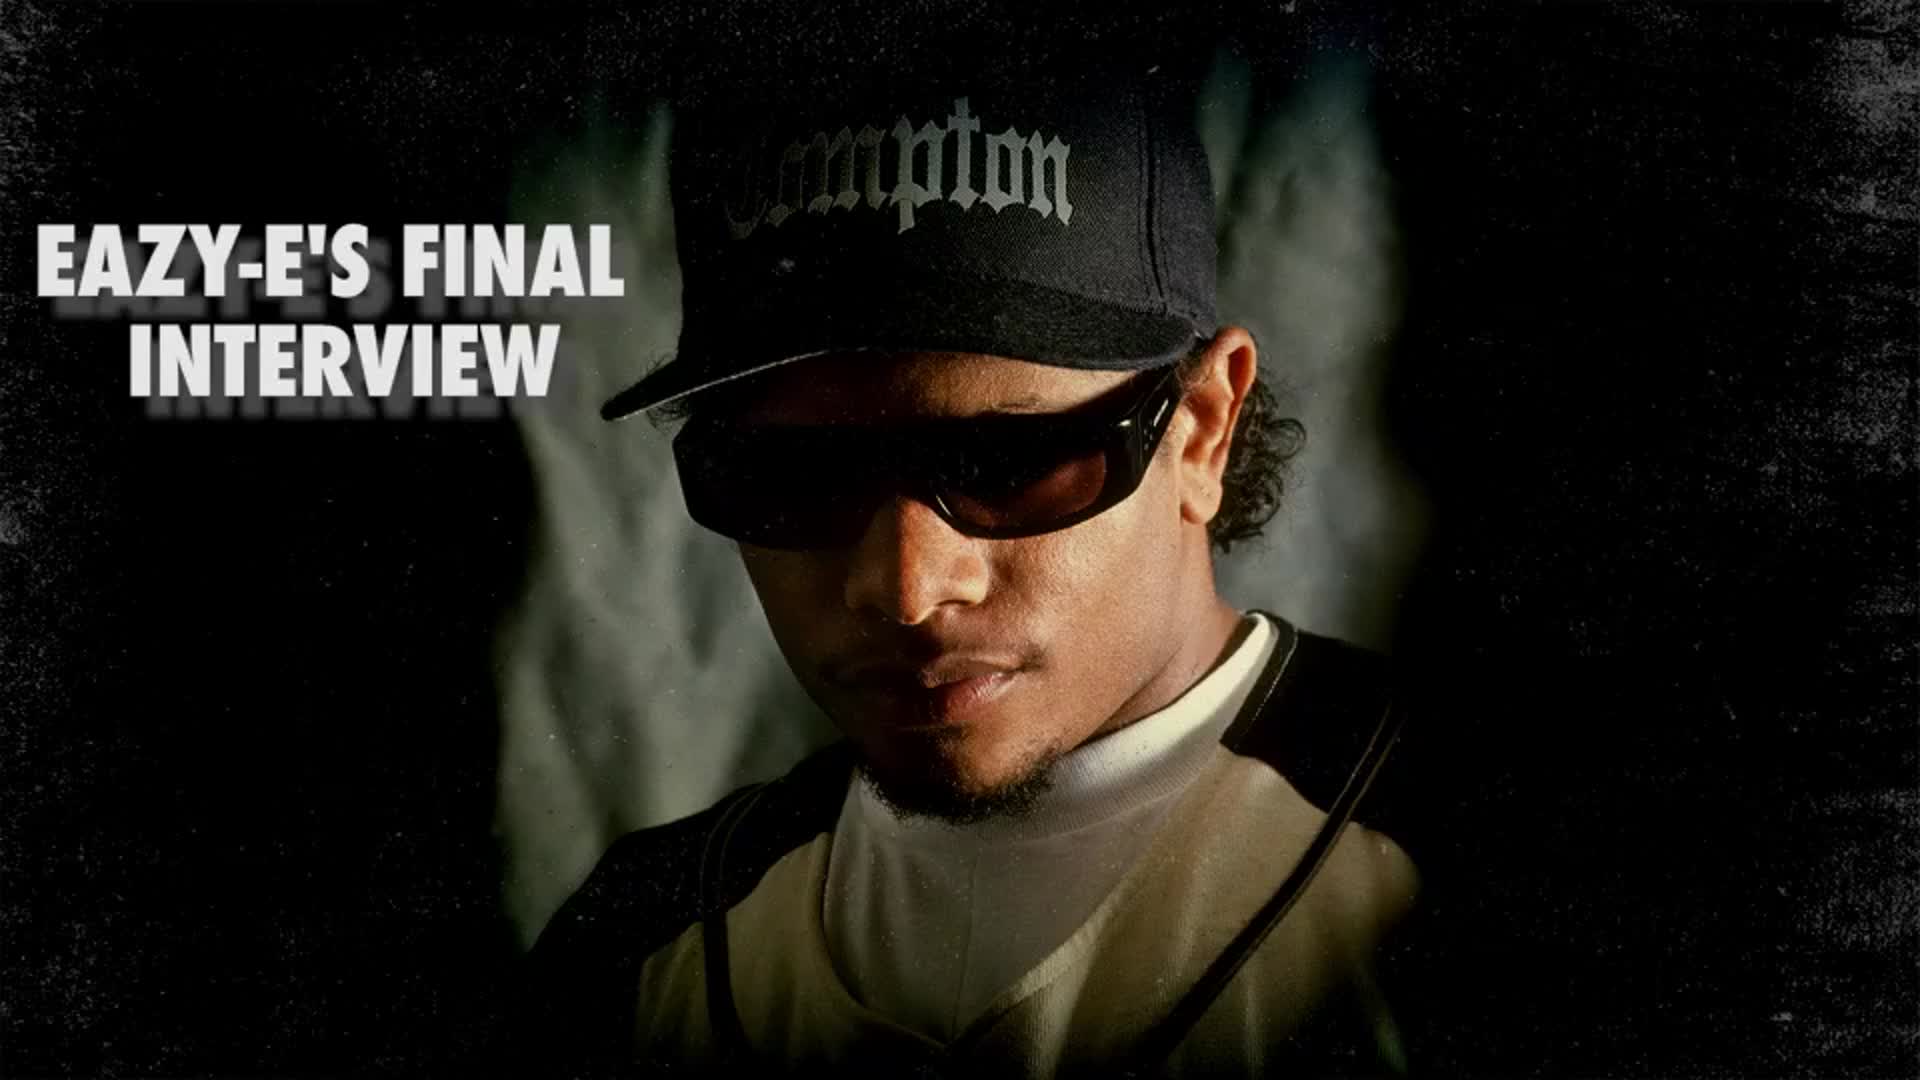 Watch Eazy-E's Final Interview | The Mysterious Death of Eazy-E Video Extras